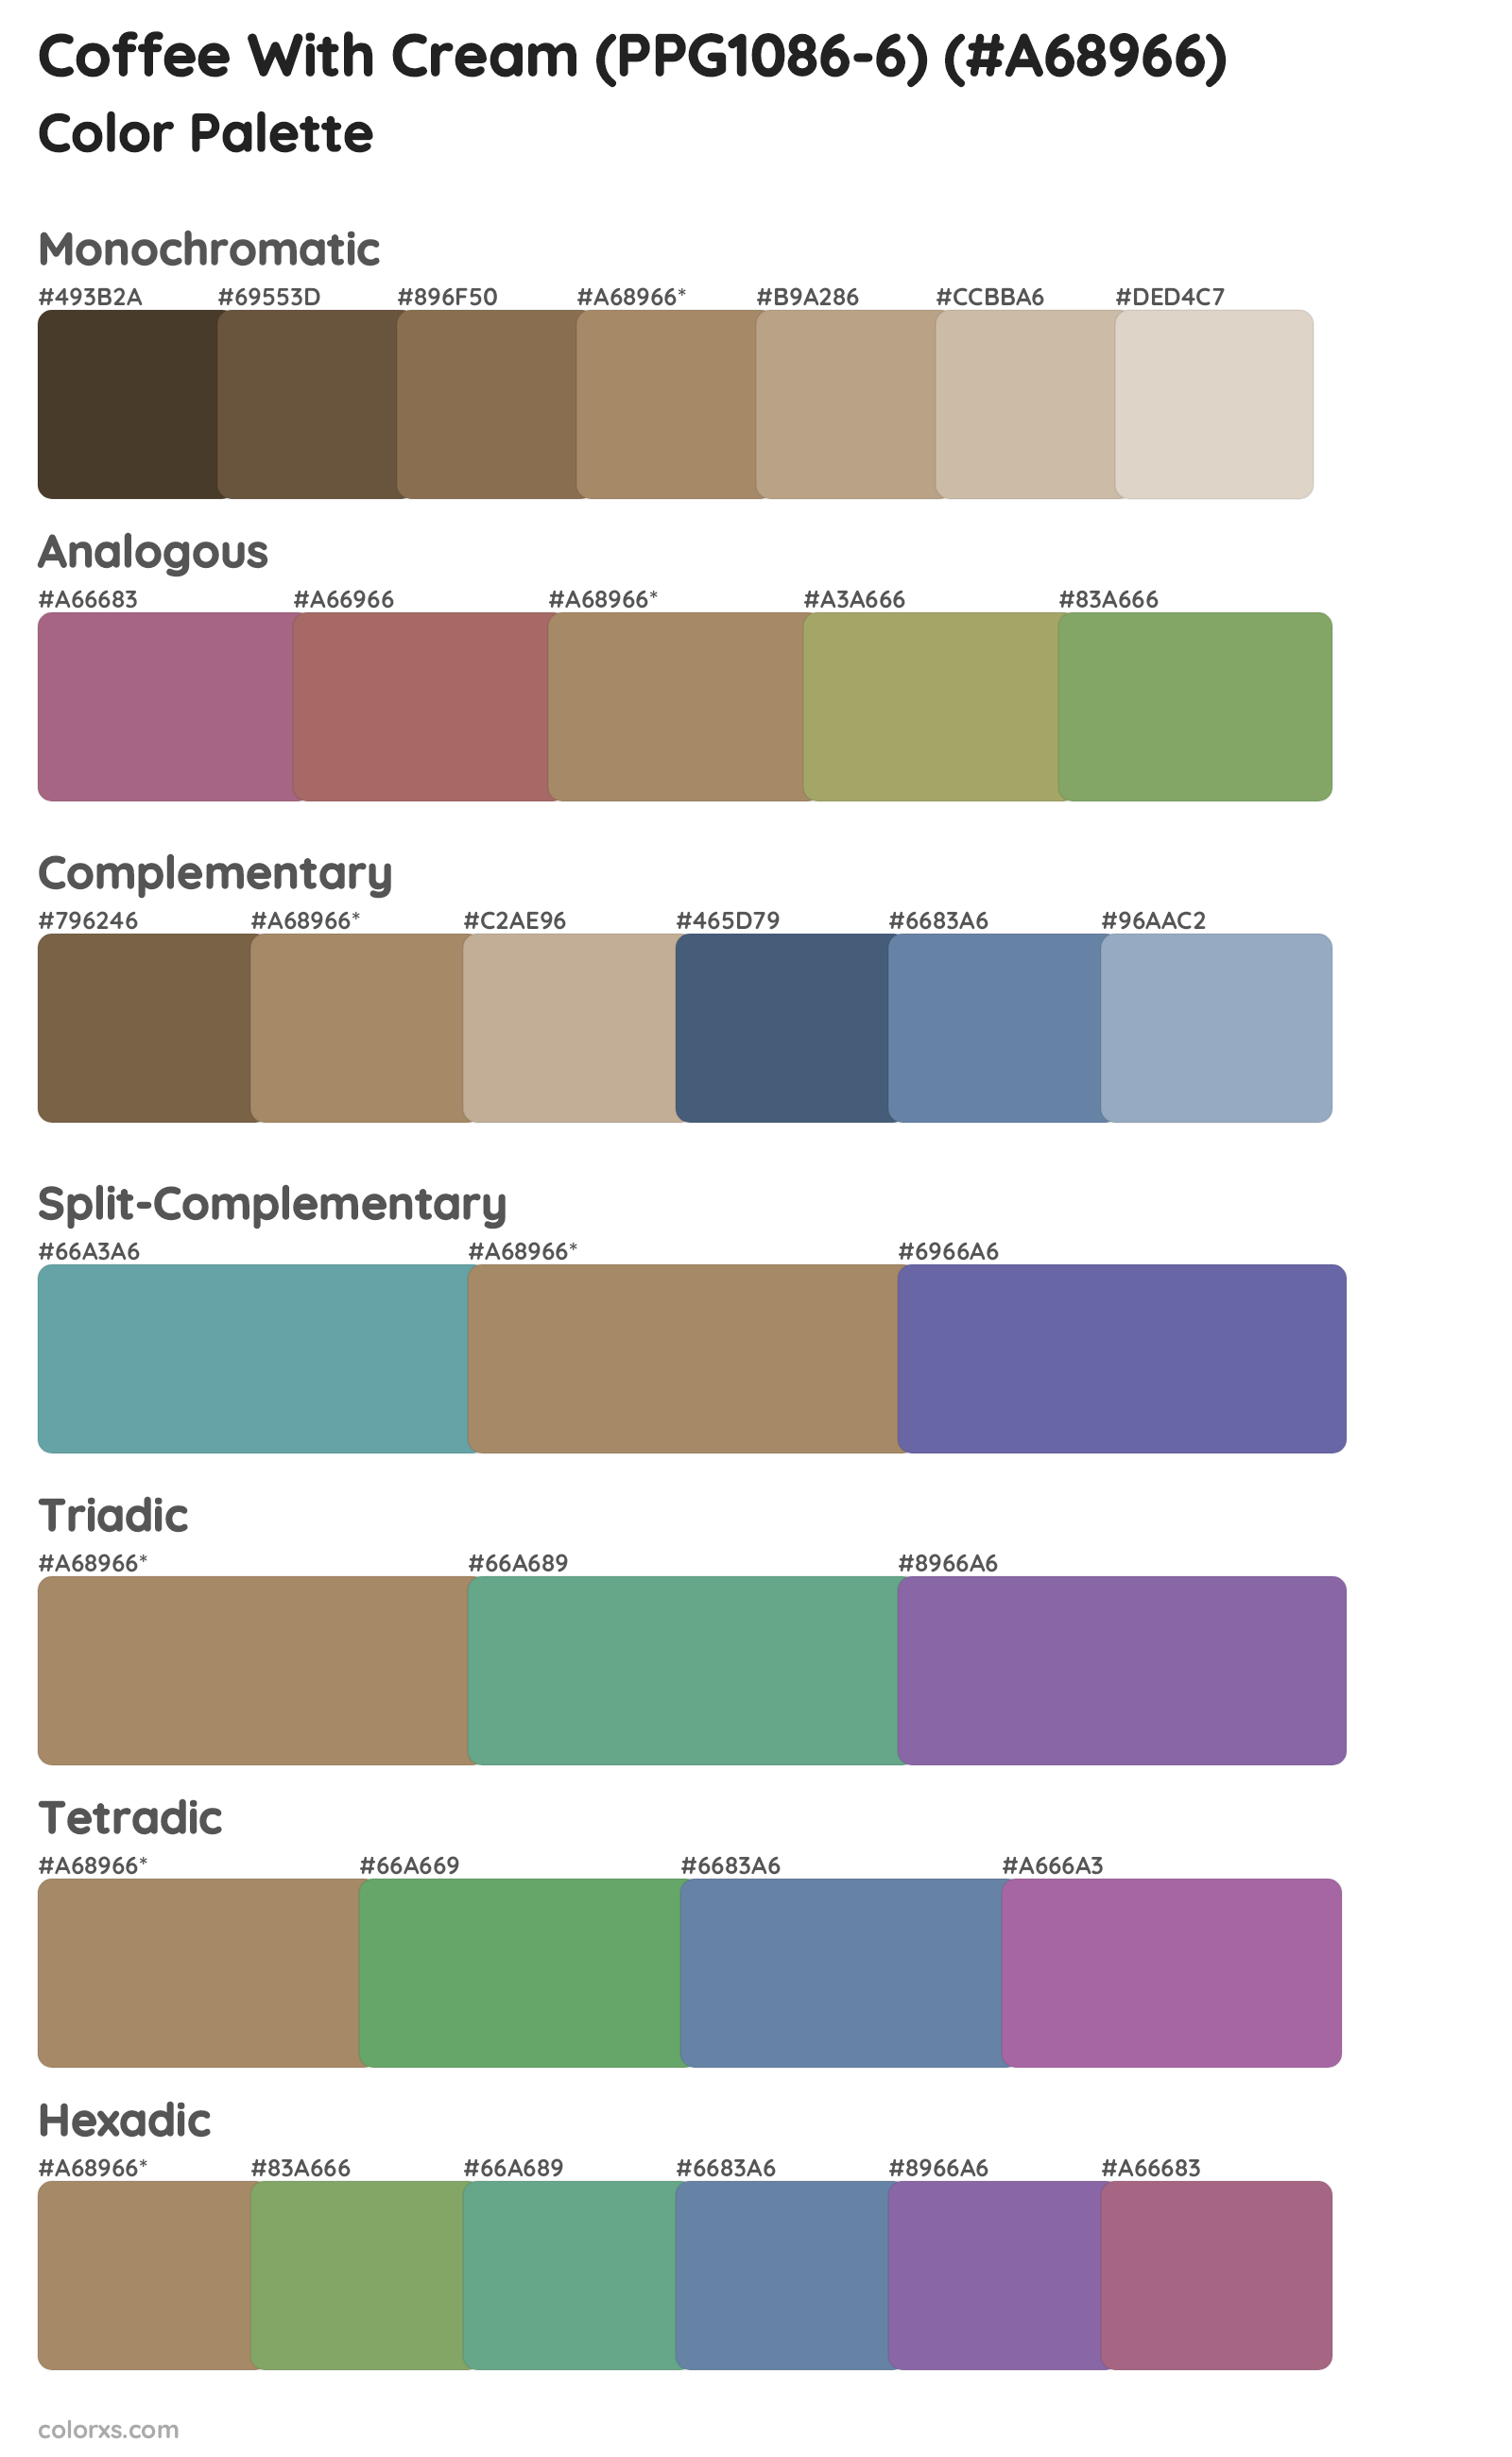 Coffee With Cream (PPG1086-6) Color Scheme Palettes